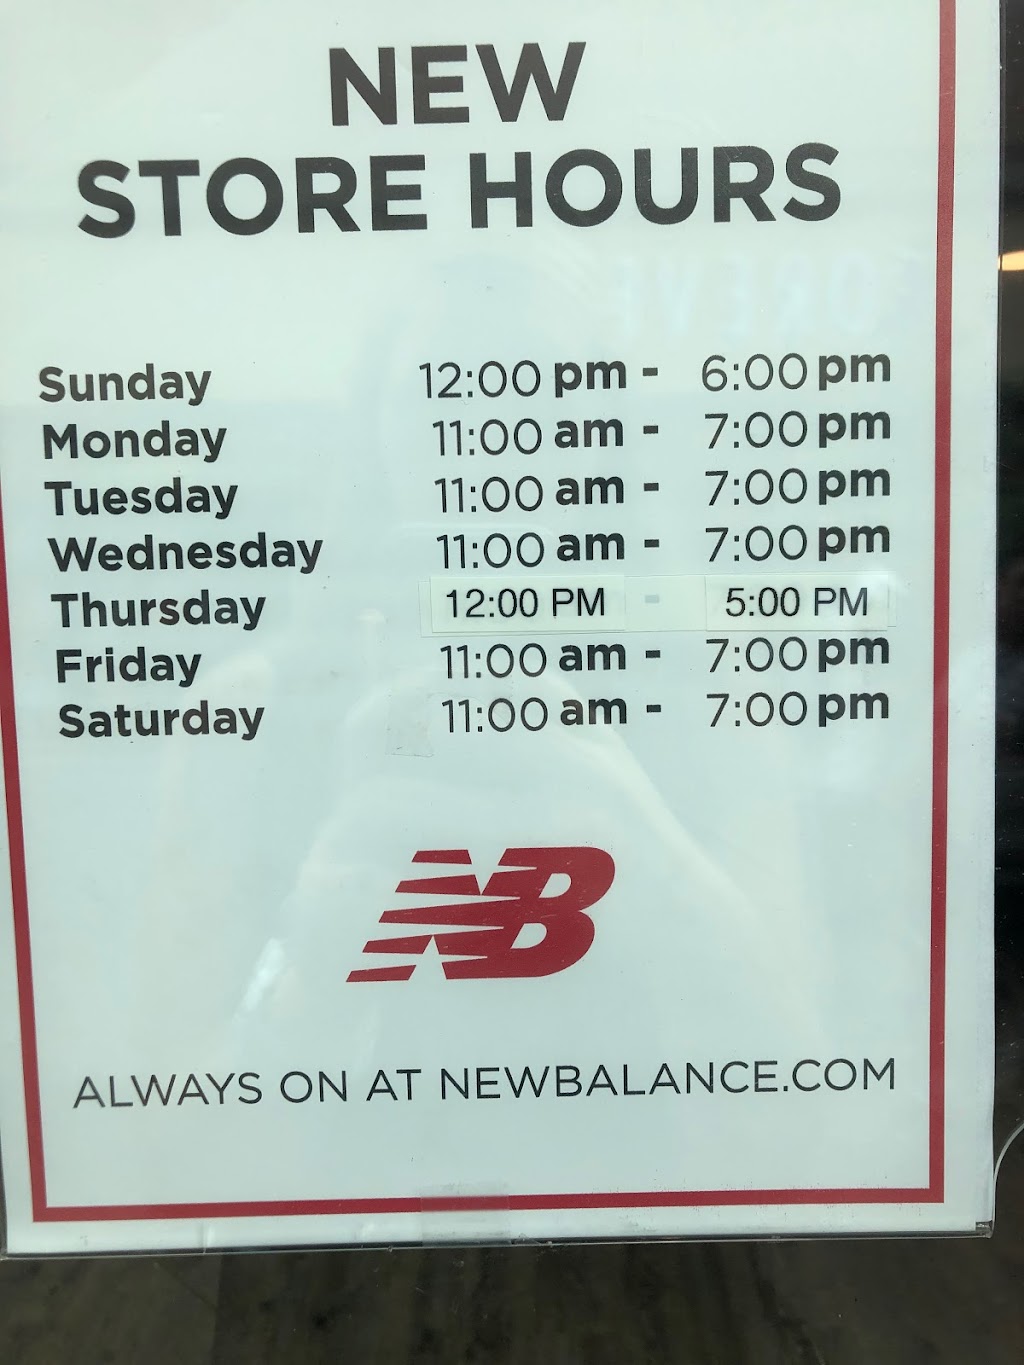 New Balance Factory Store Woodburn | Premium Outlet Stores, 1001 N Arney Rd #820, Woodburn, OR 97071, USA | Phone: (503) 982-5368